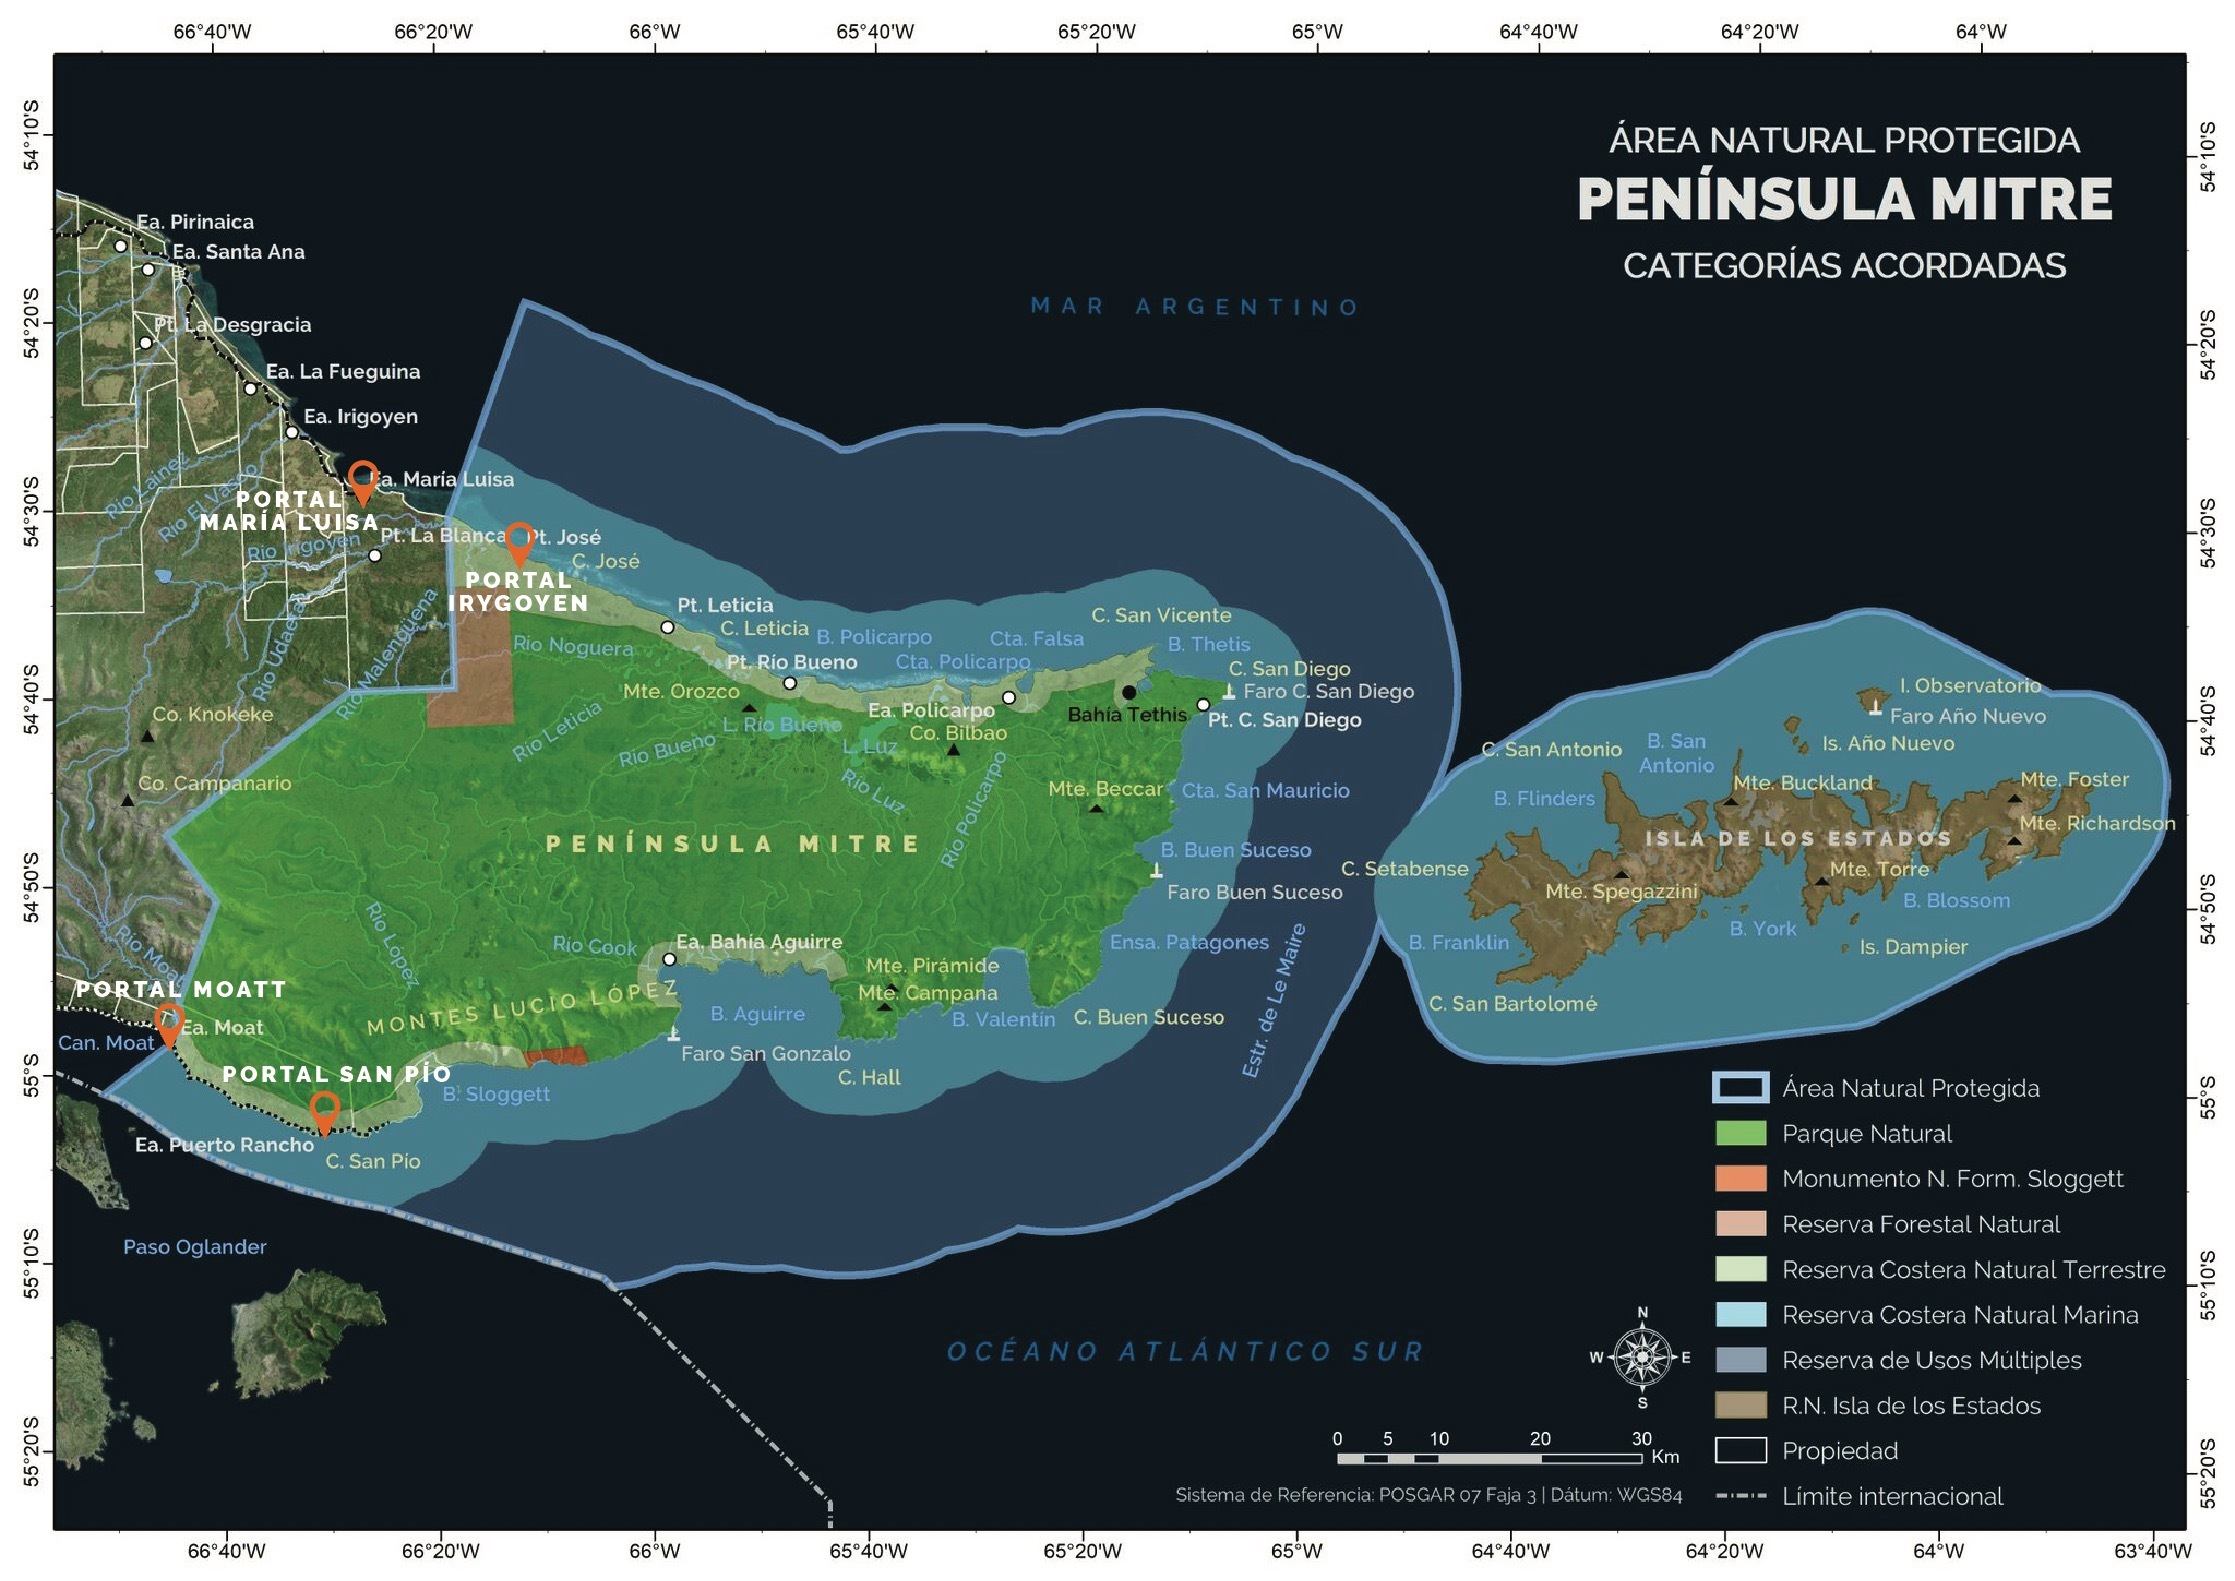 Argentina’s Peninsula Mitre Map of Agreed Categories of Protection